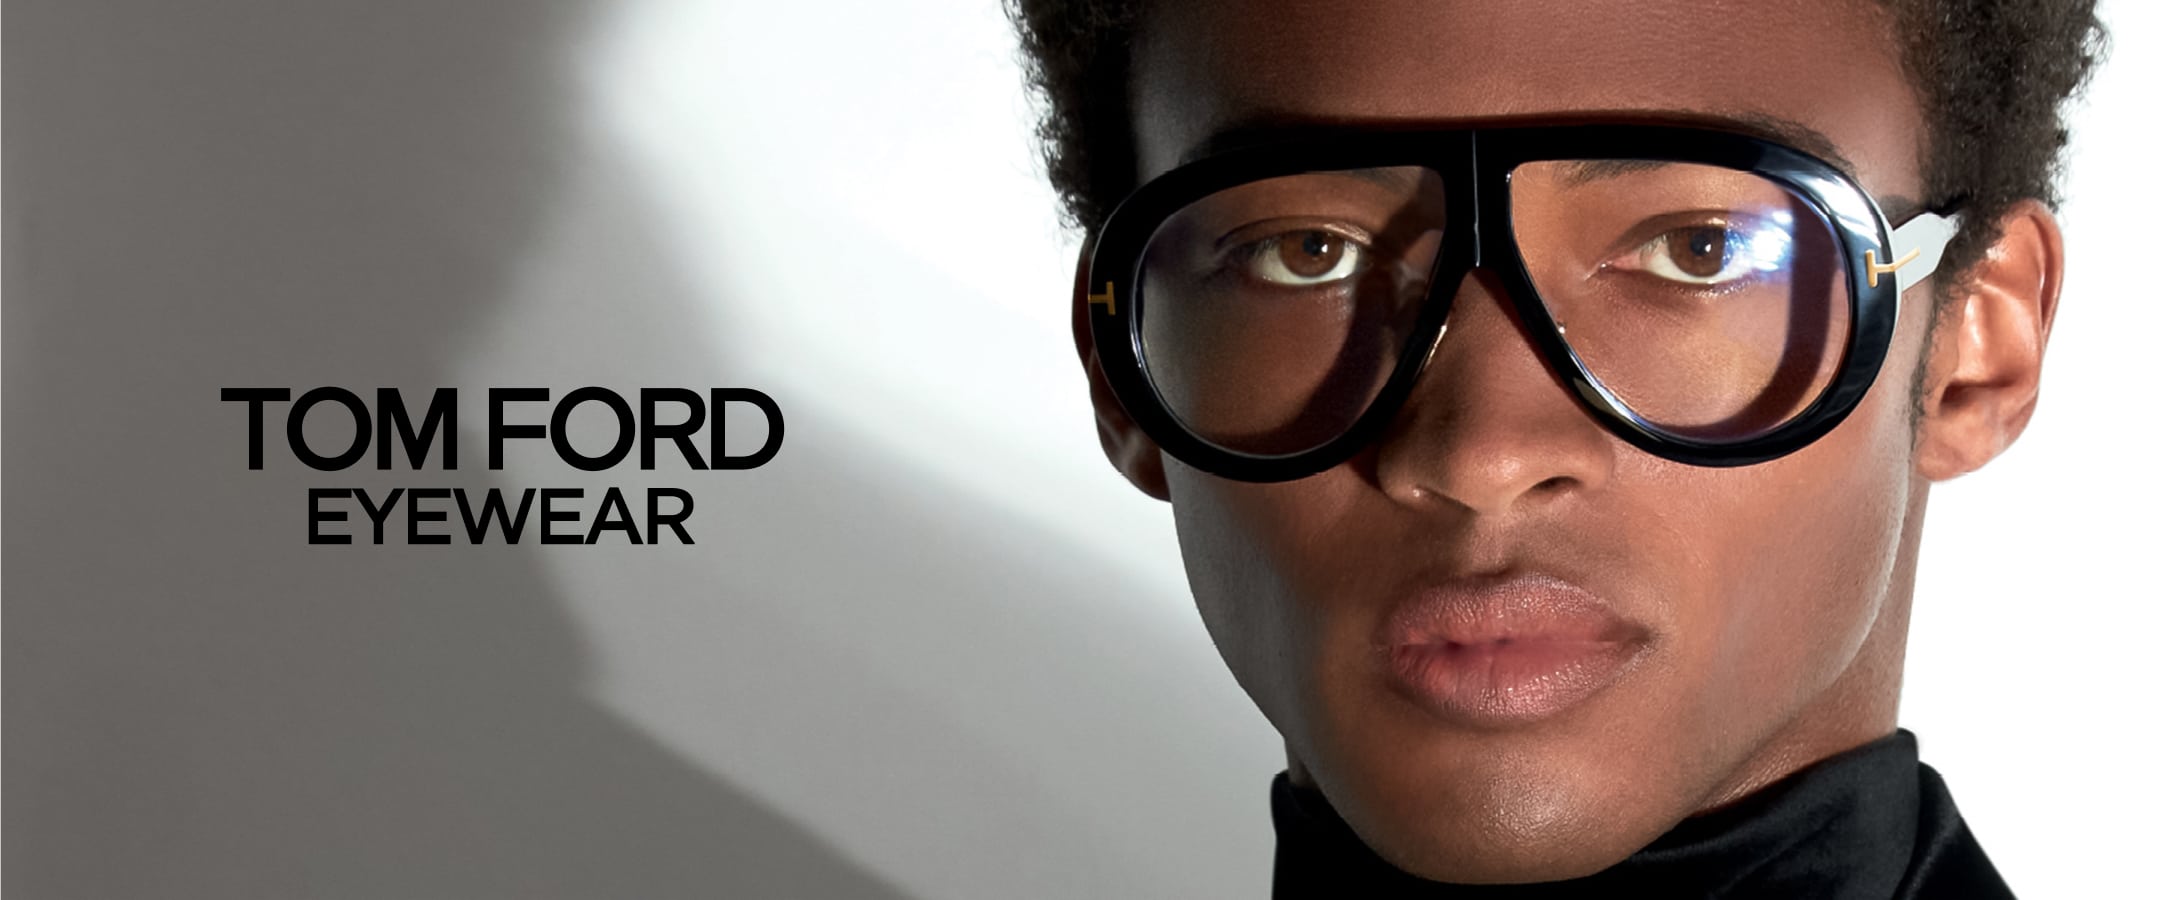 Tom Ford 3 Collection Image